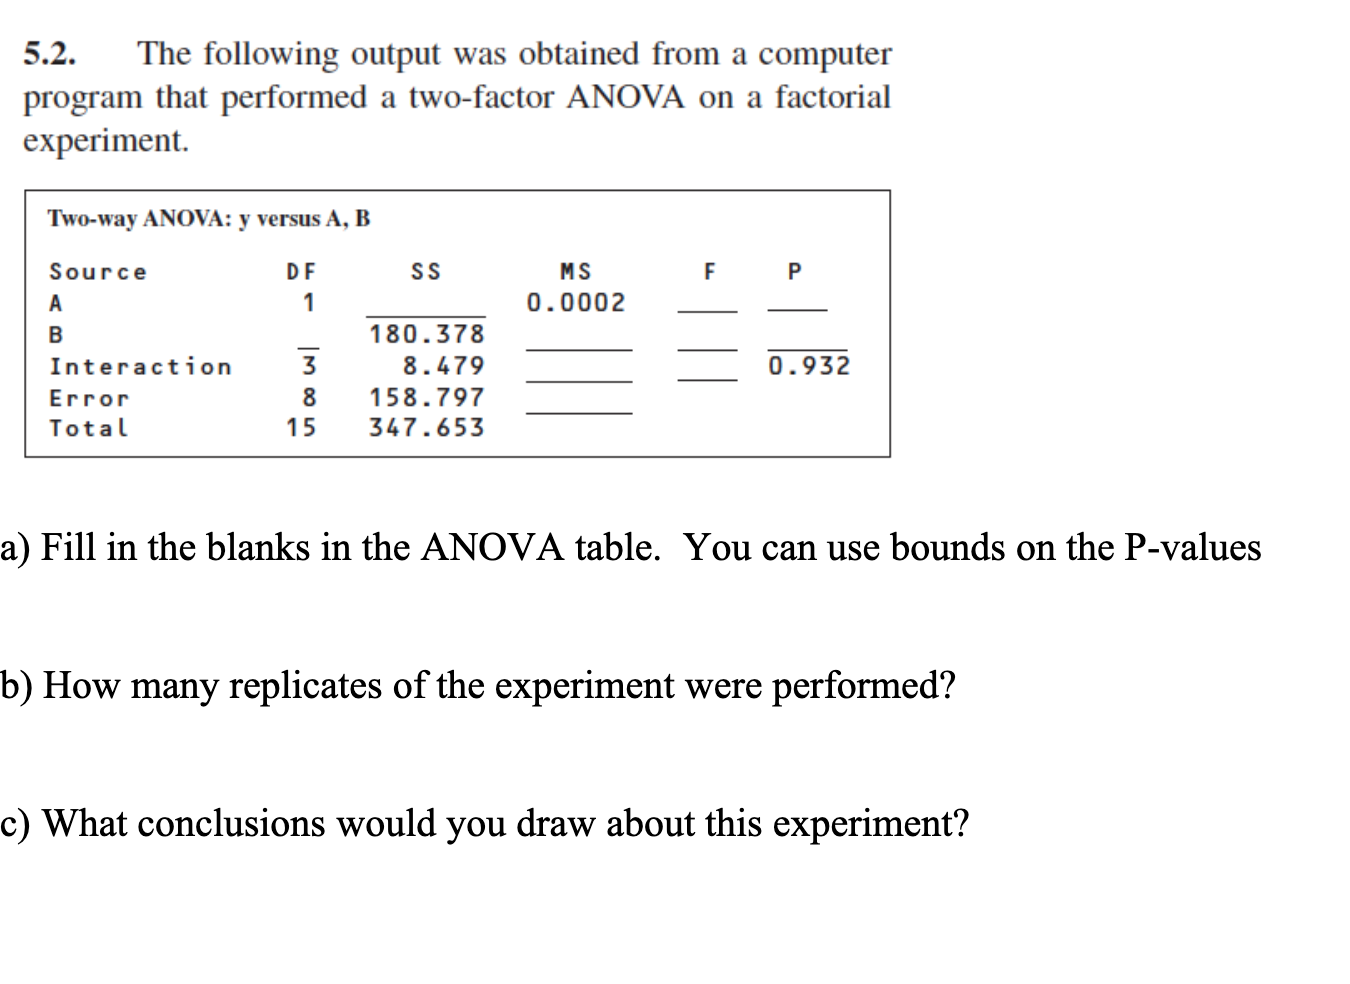 calculating degrees of freedom mixed factor anova